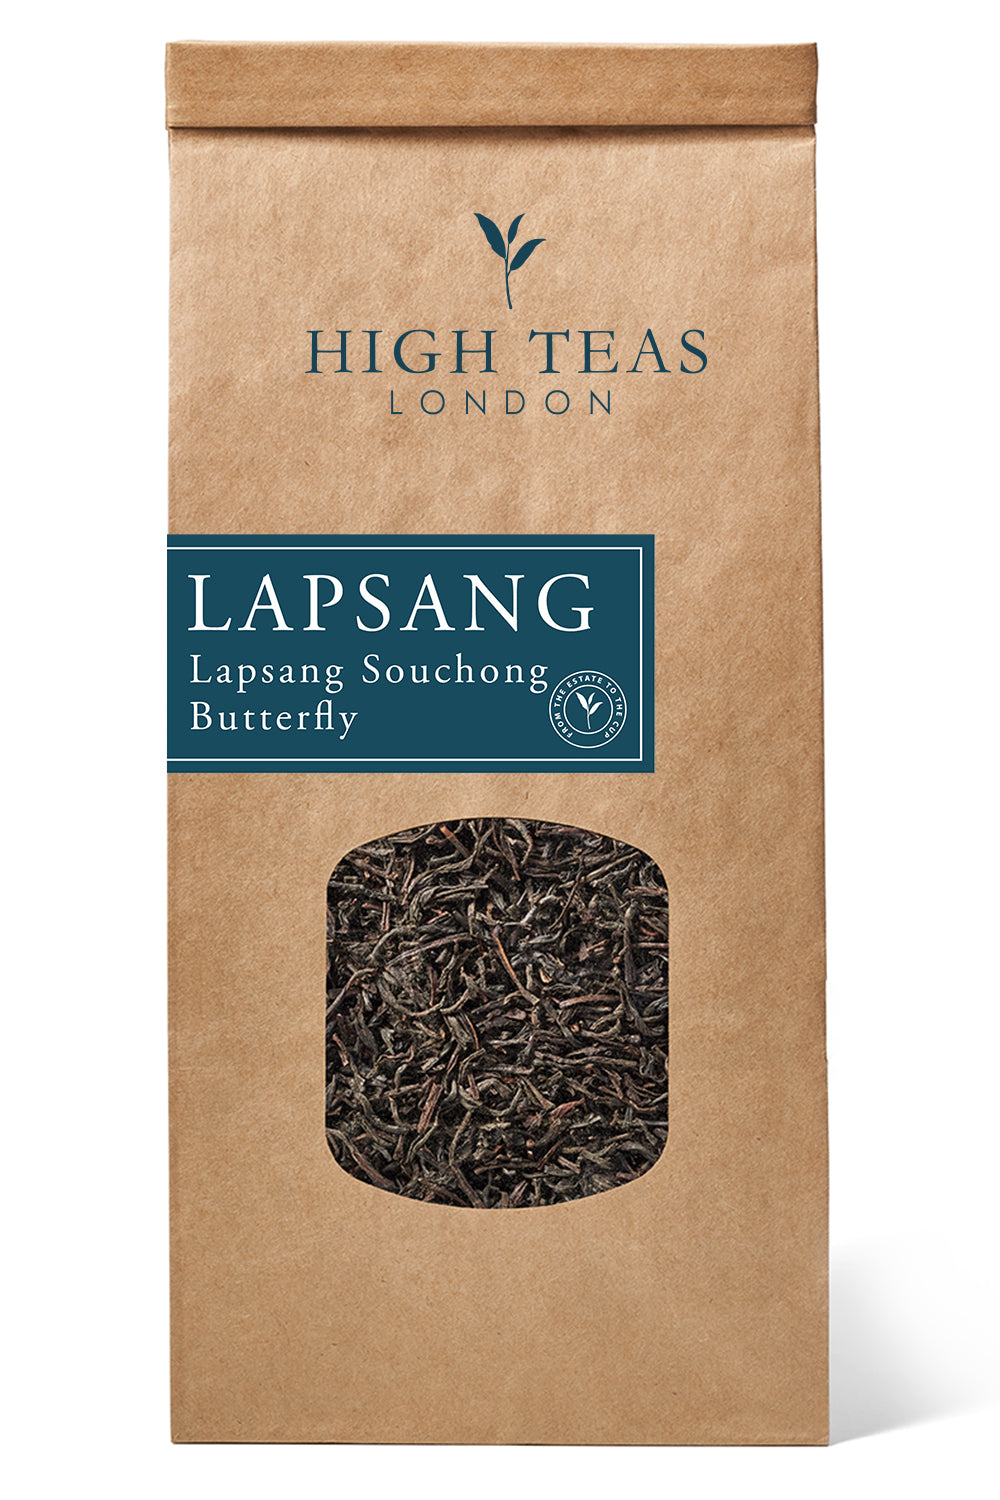 Lapsang Souchong Butterfly-250g-Loose Leaf Tea-High Teas